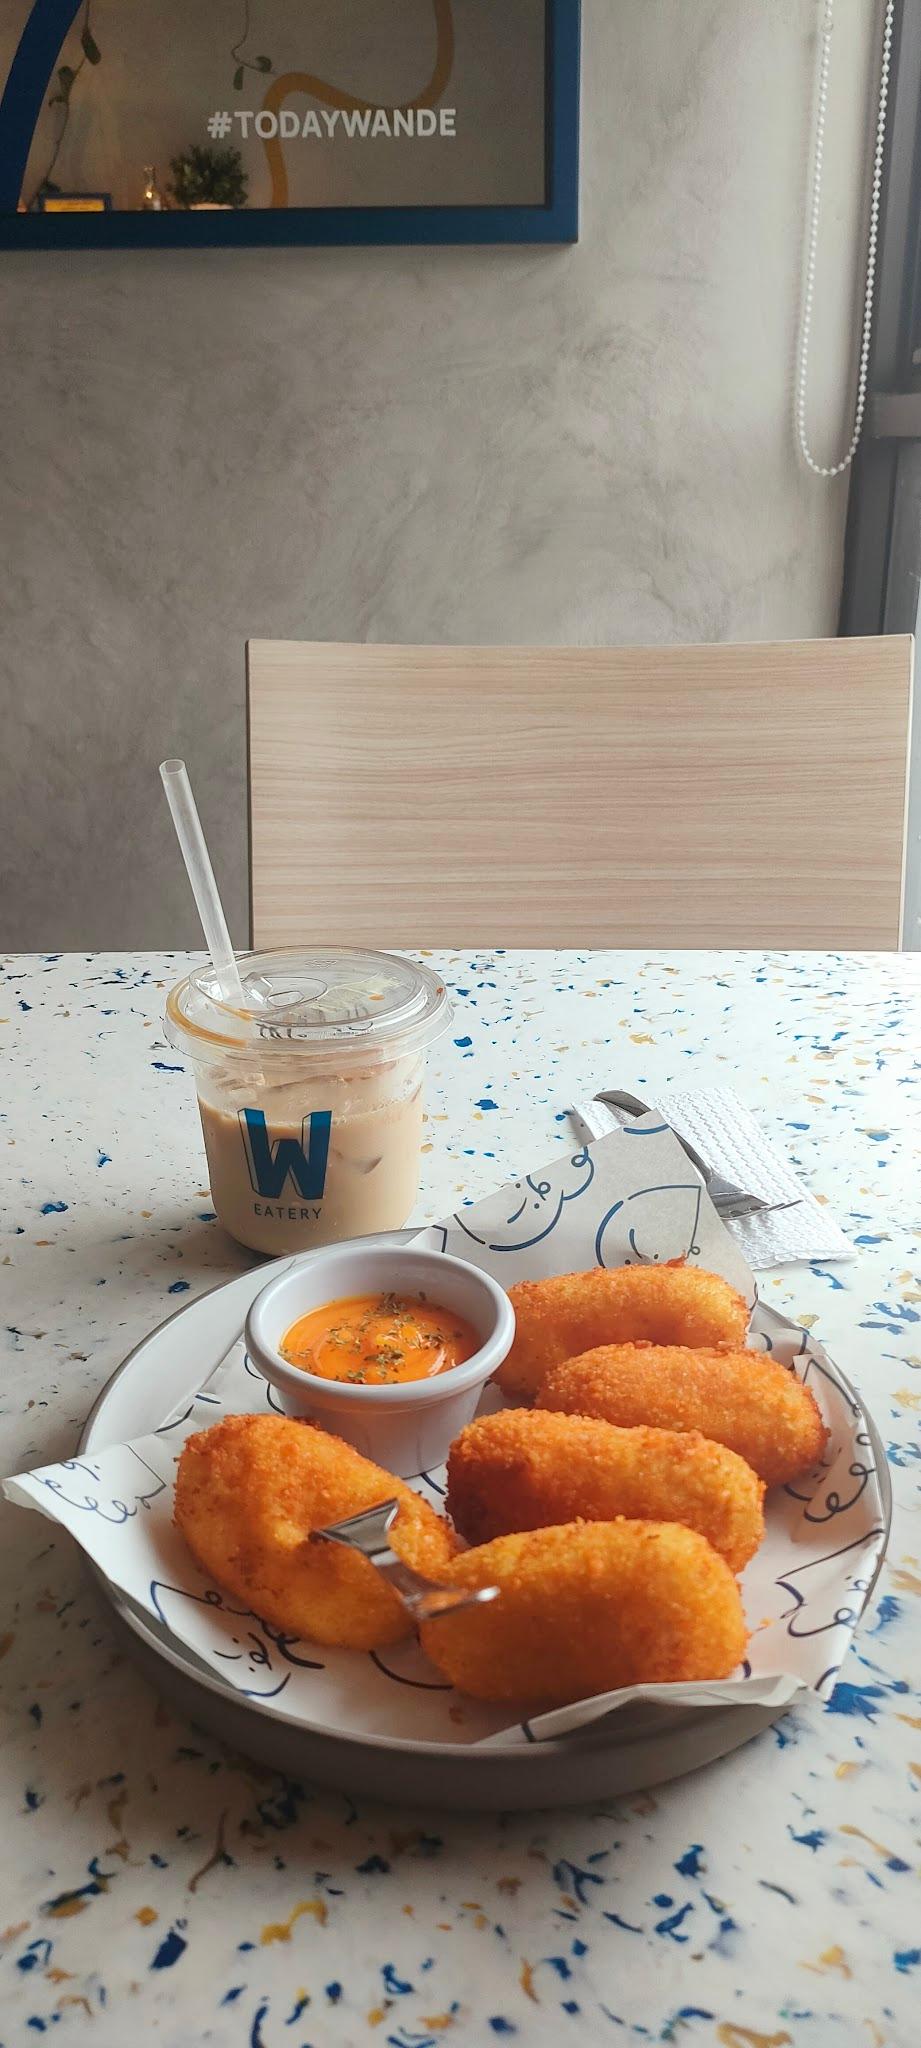 Wande Eatery review